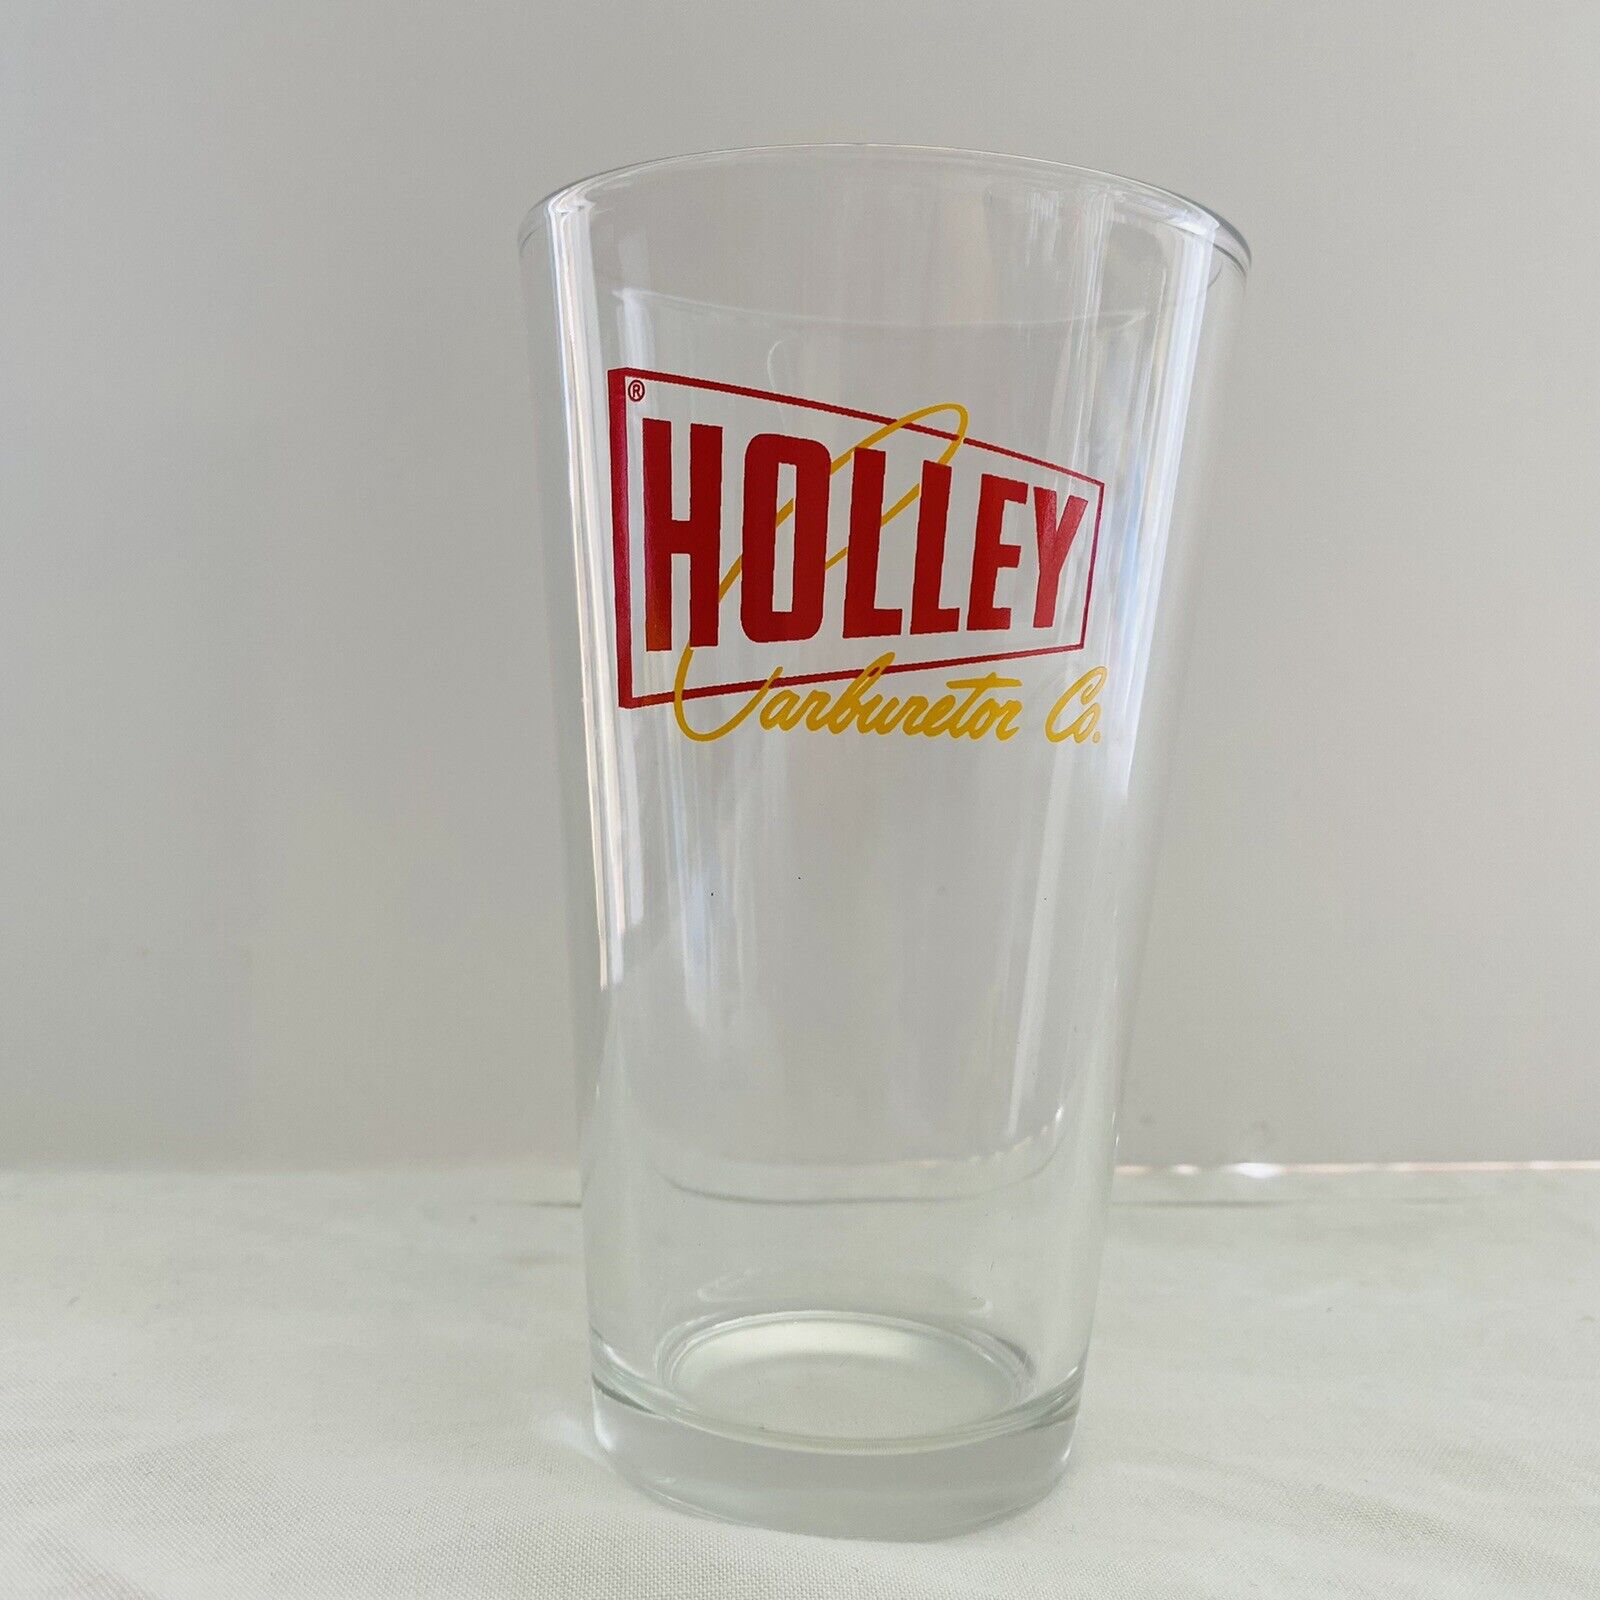 Holley Carburetor Co. 425ml pint Beer glass Mancave Collectable Barware USA